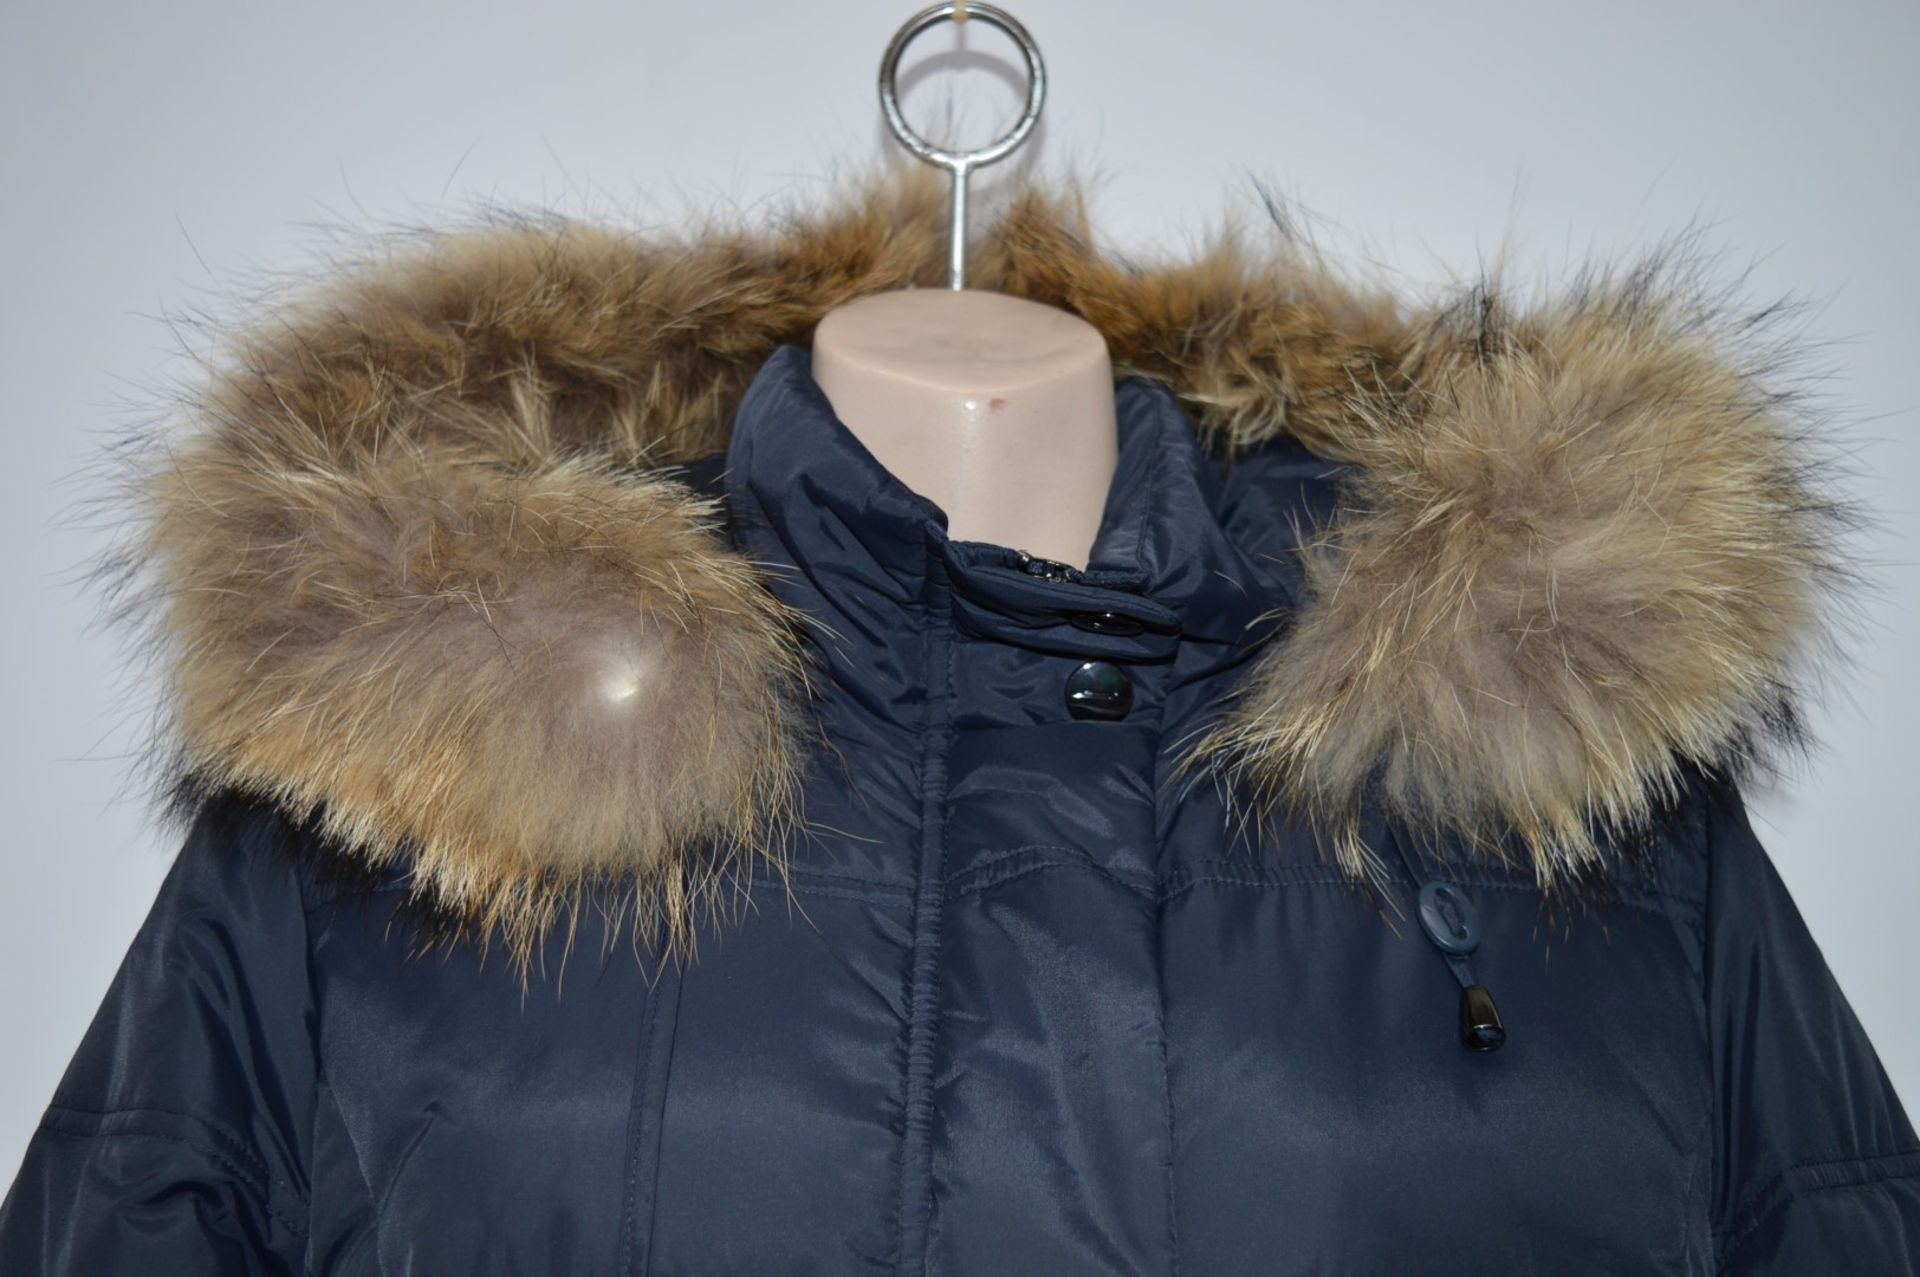 1 x Steilmann Womens Parker Coat - Real Down Feather Filled Coat With Functional Pockets, Inner - Image 3 of 12